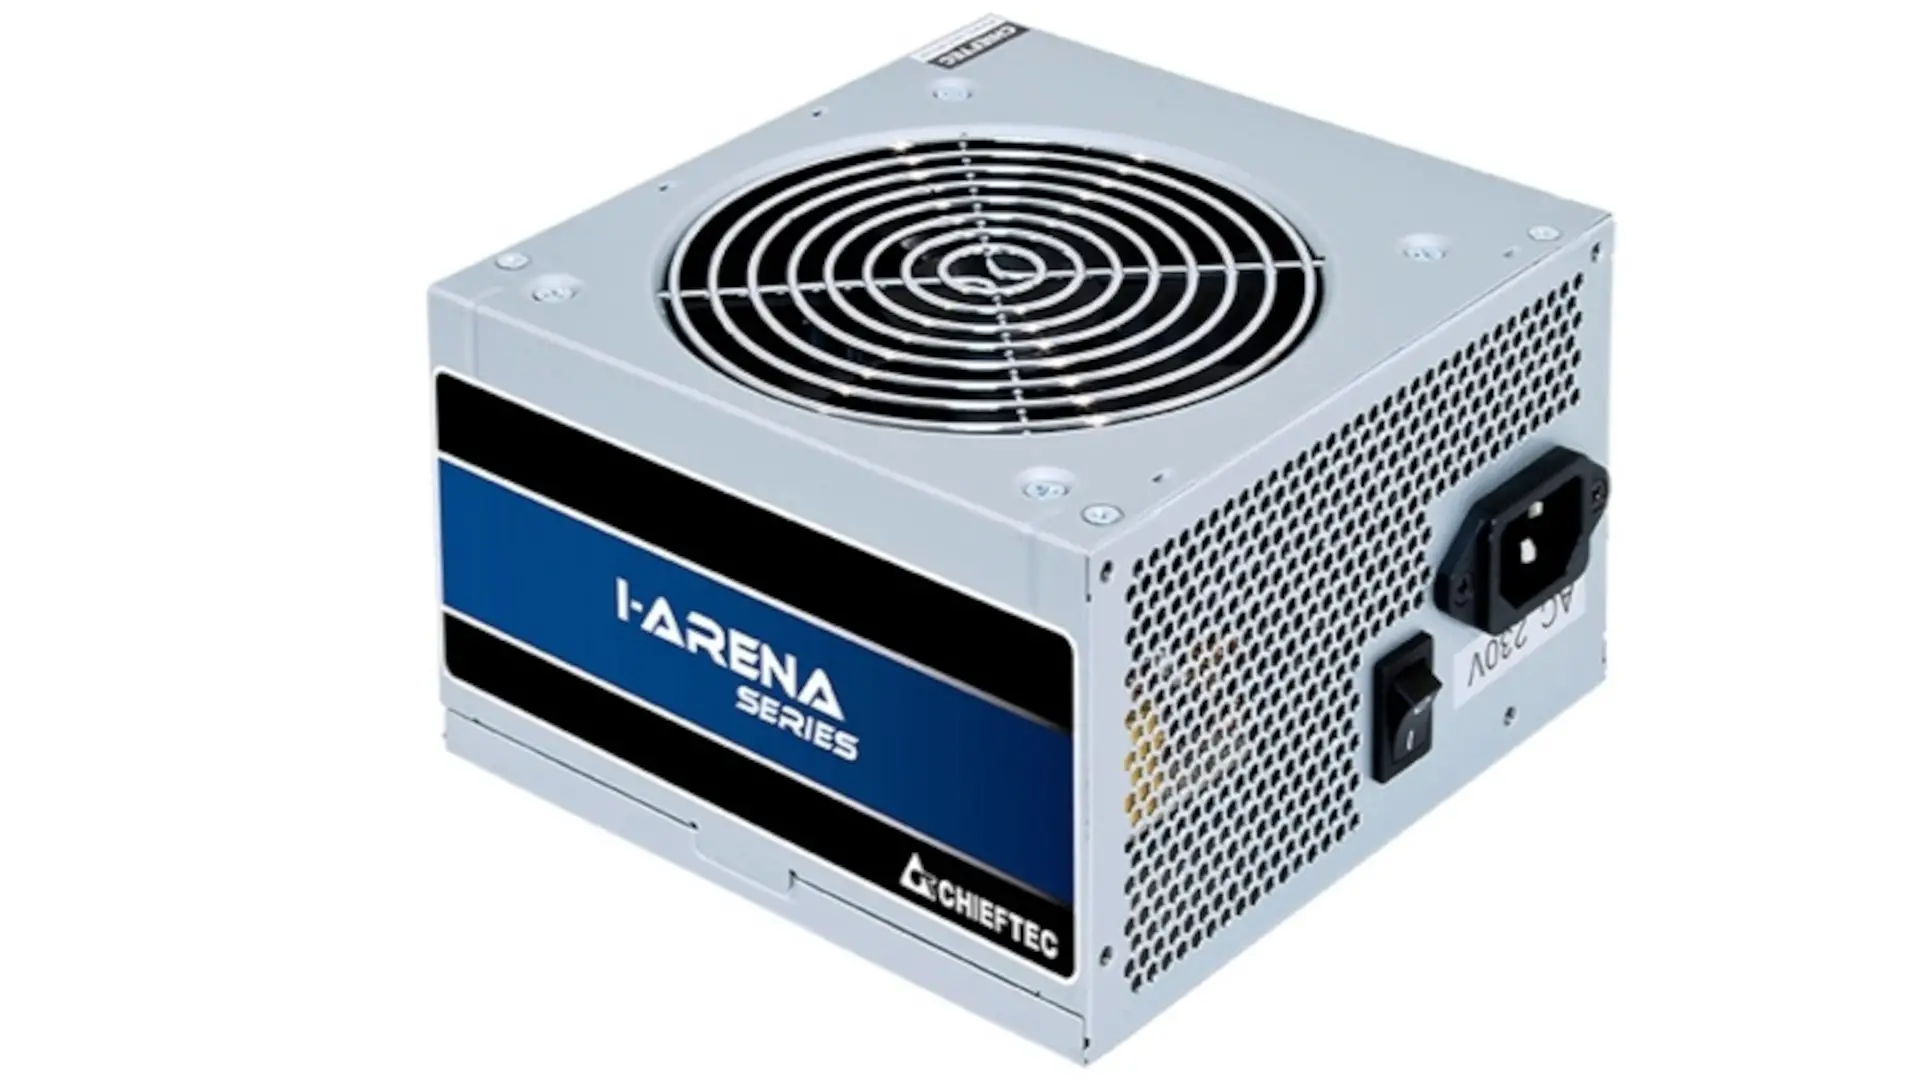 You are currently viewing Chieftec iARENA GPB-450S Power Supply Review